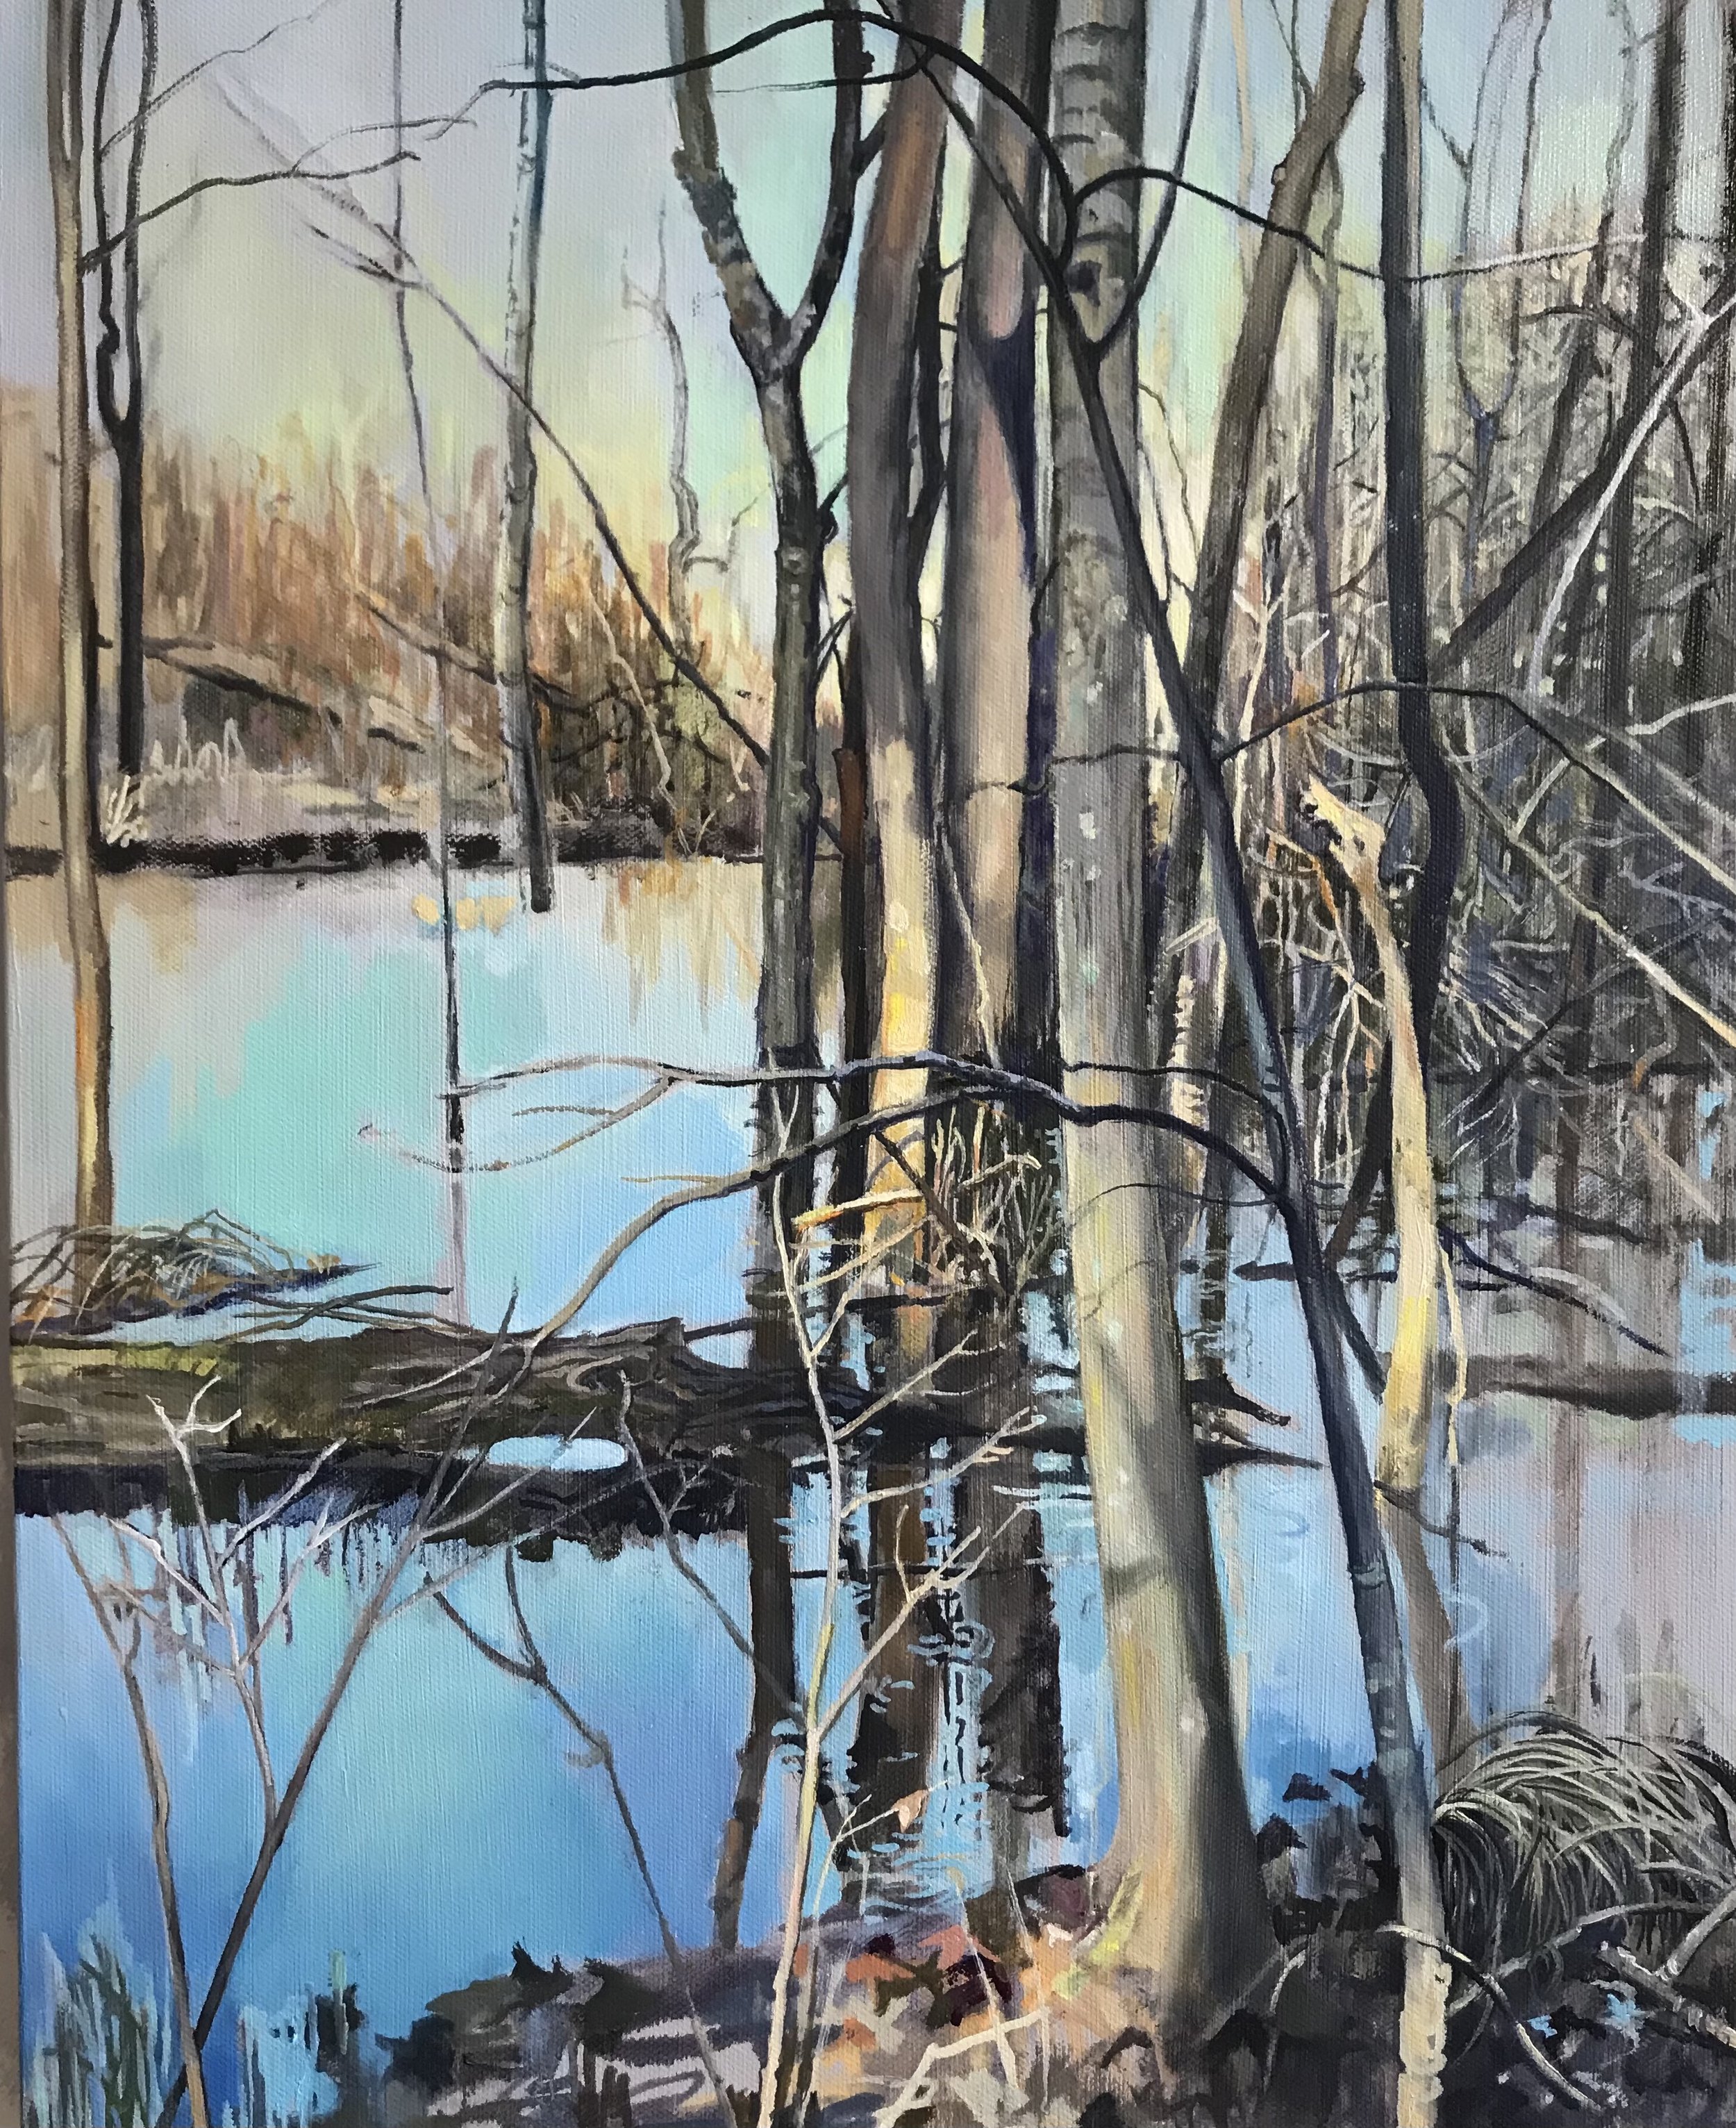 "Early Glow - Haw River Wetlands"   oil   20 x 16 inches   